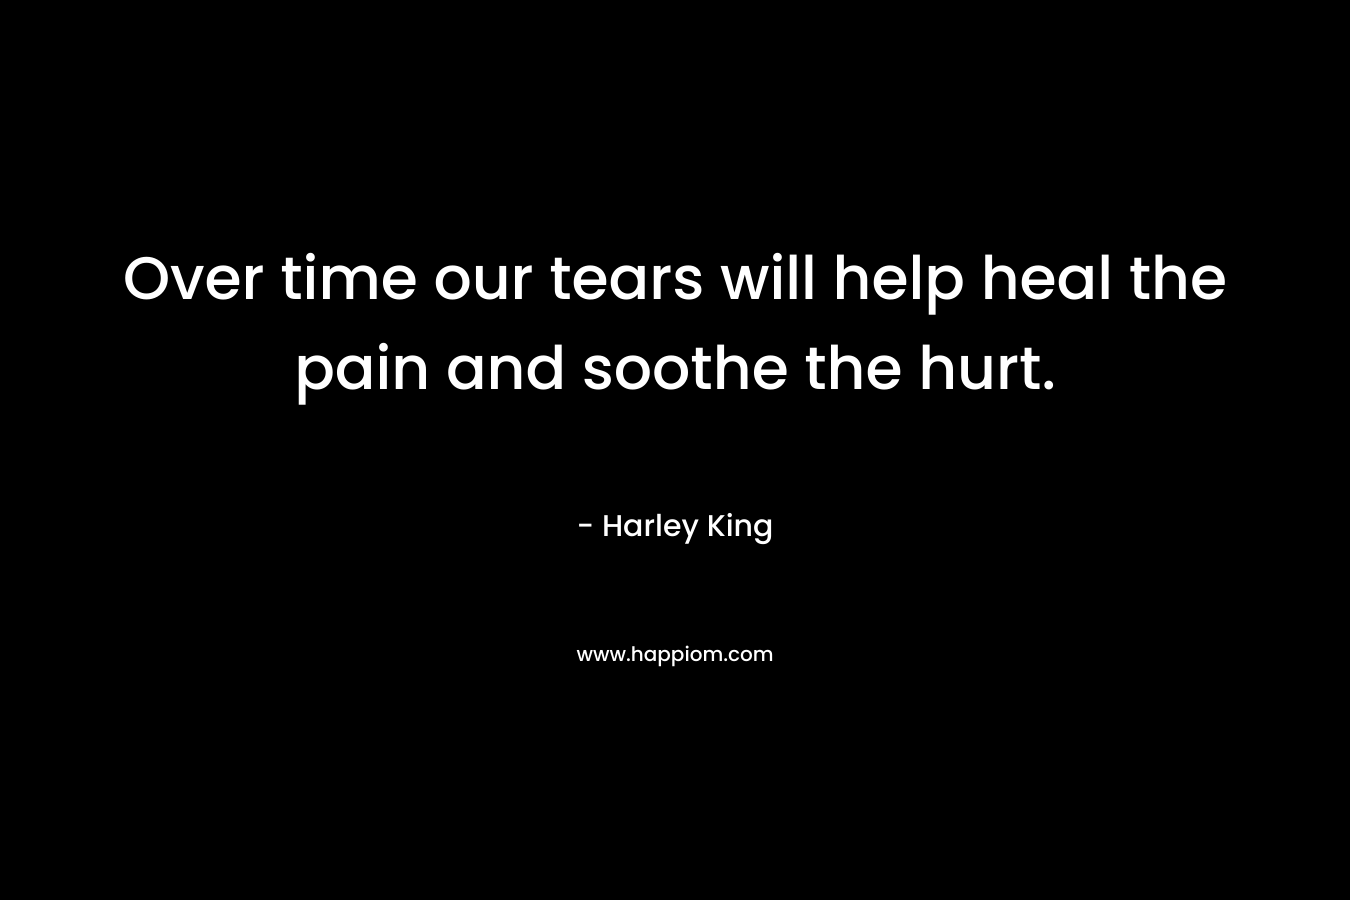 Over time our tears will help heal the pain and soothe the hurt. – Harley King